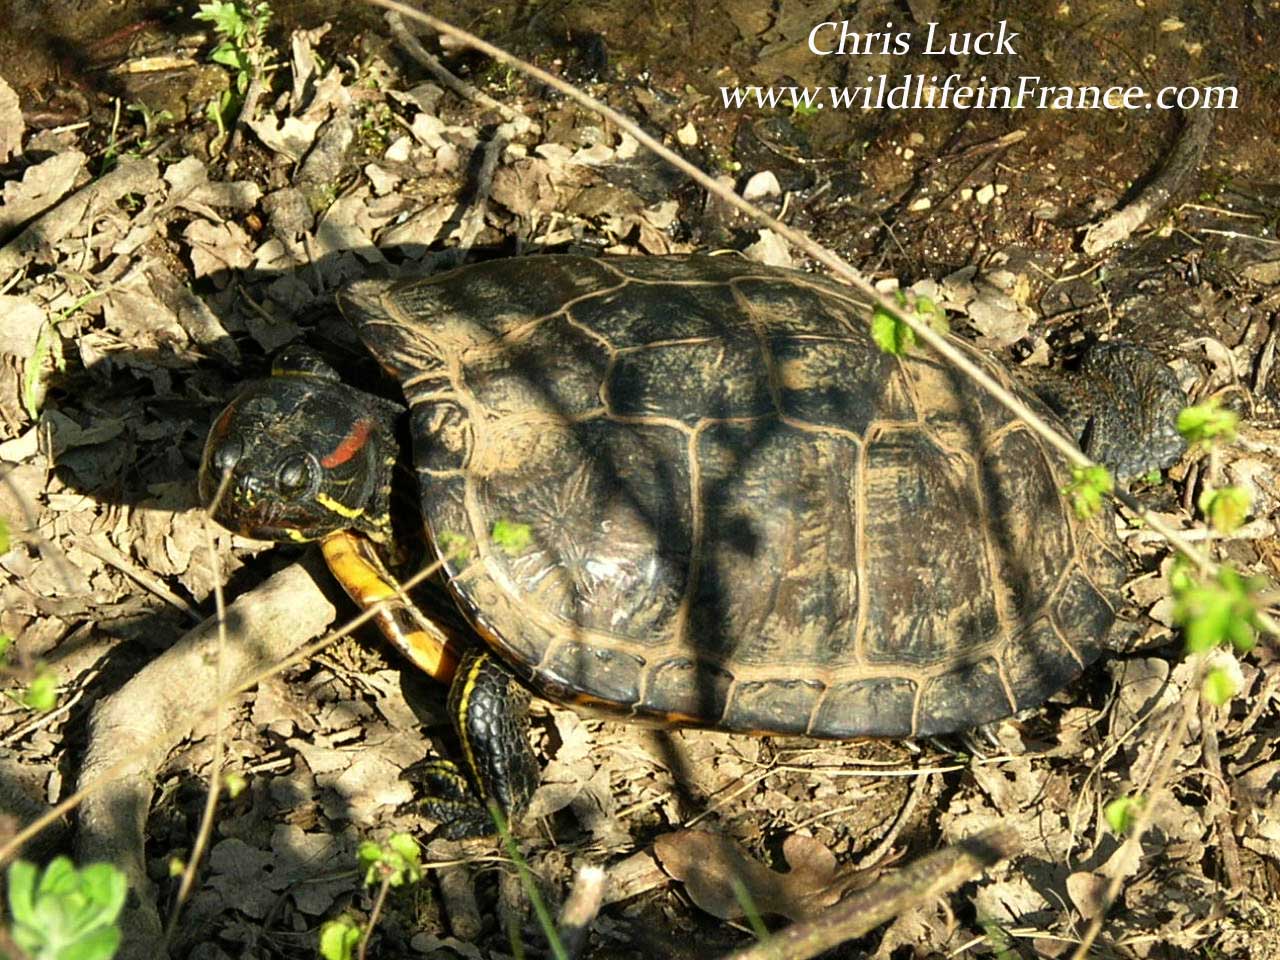 Florida Turtle, an introduced non native species